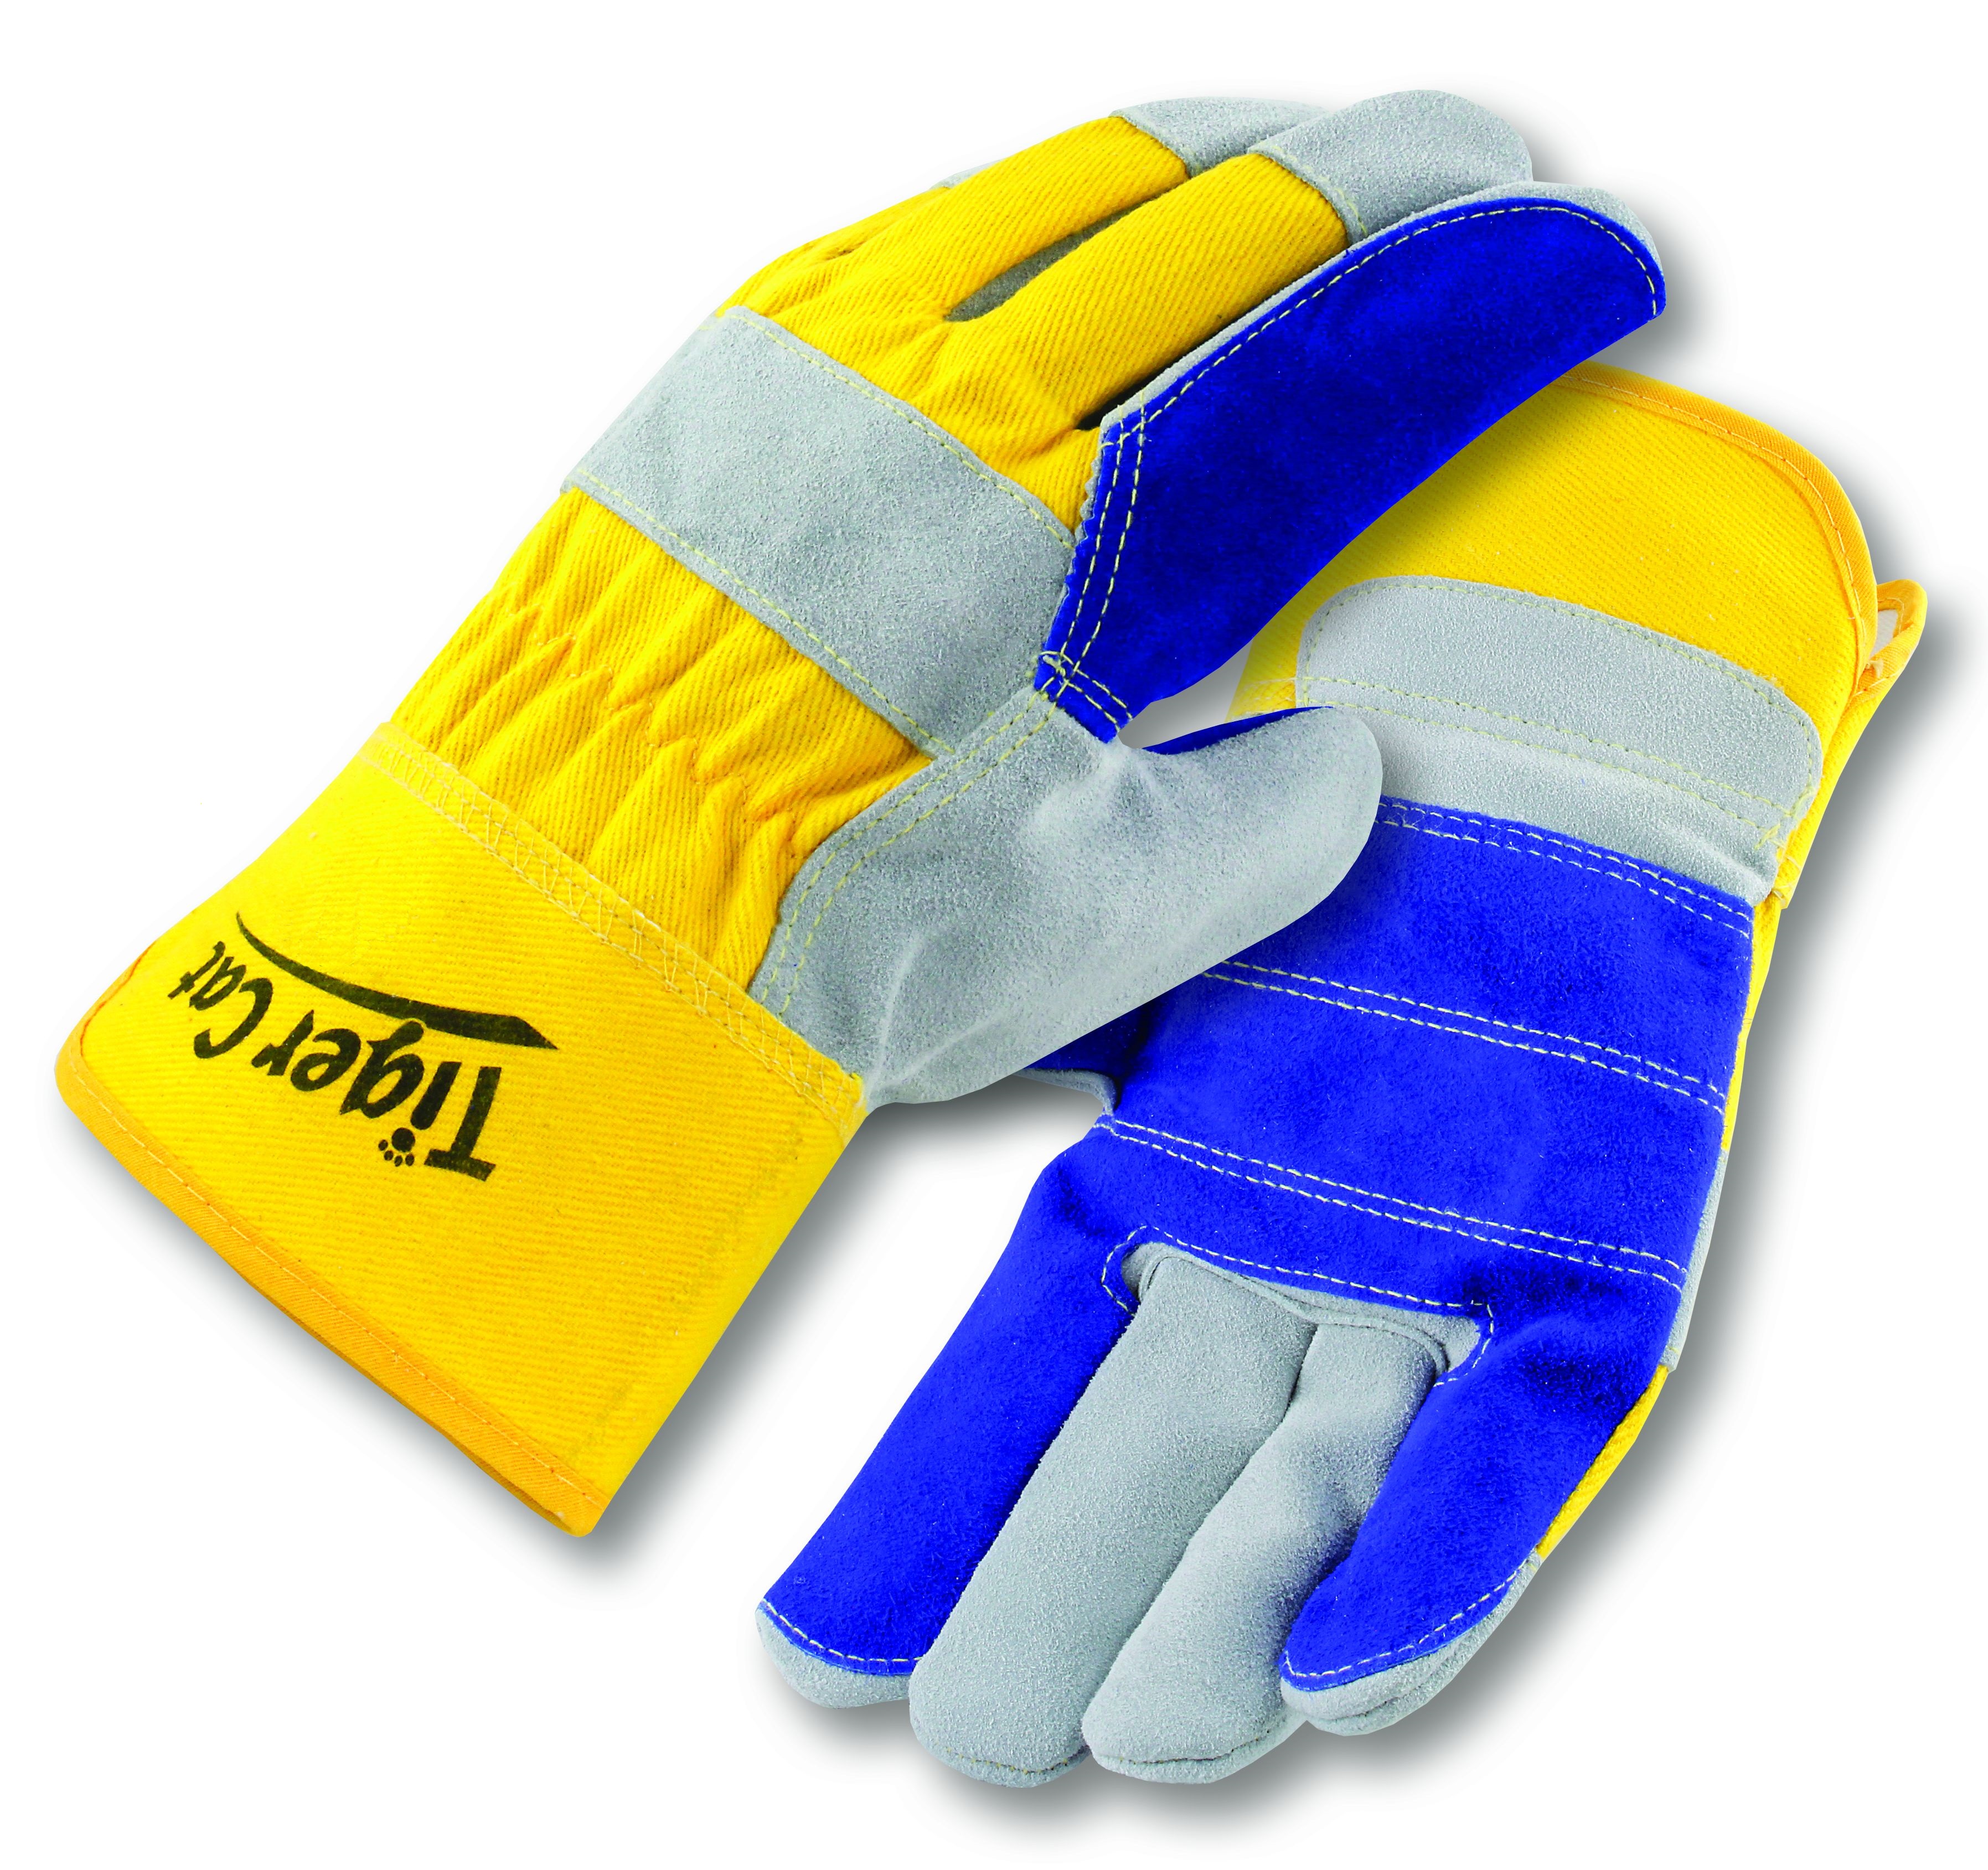 Tiger Cat&trade; Premium Leather Double Palm Gloves, Safety Cuff, Sewn w/ Cut Resistant Thread1P